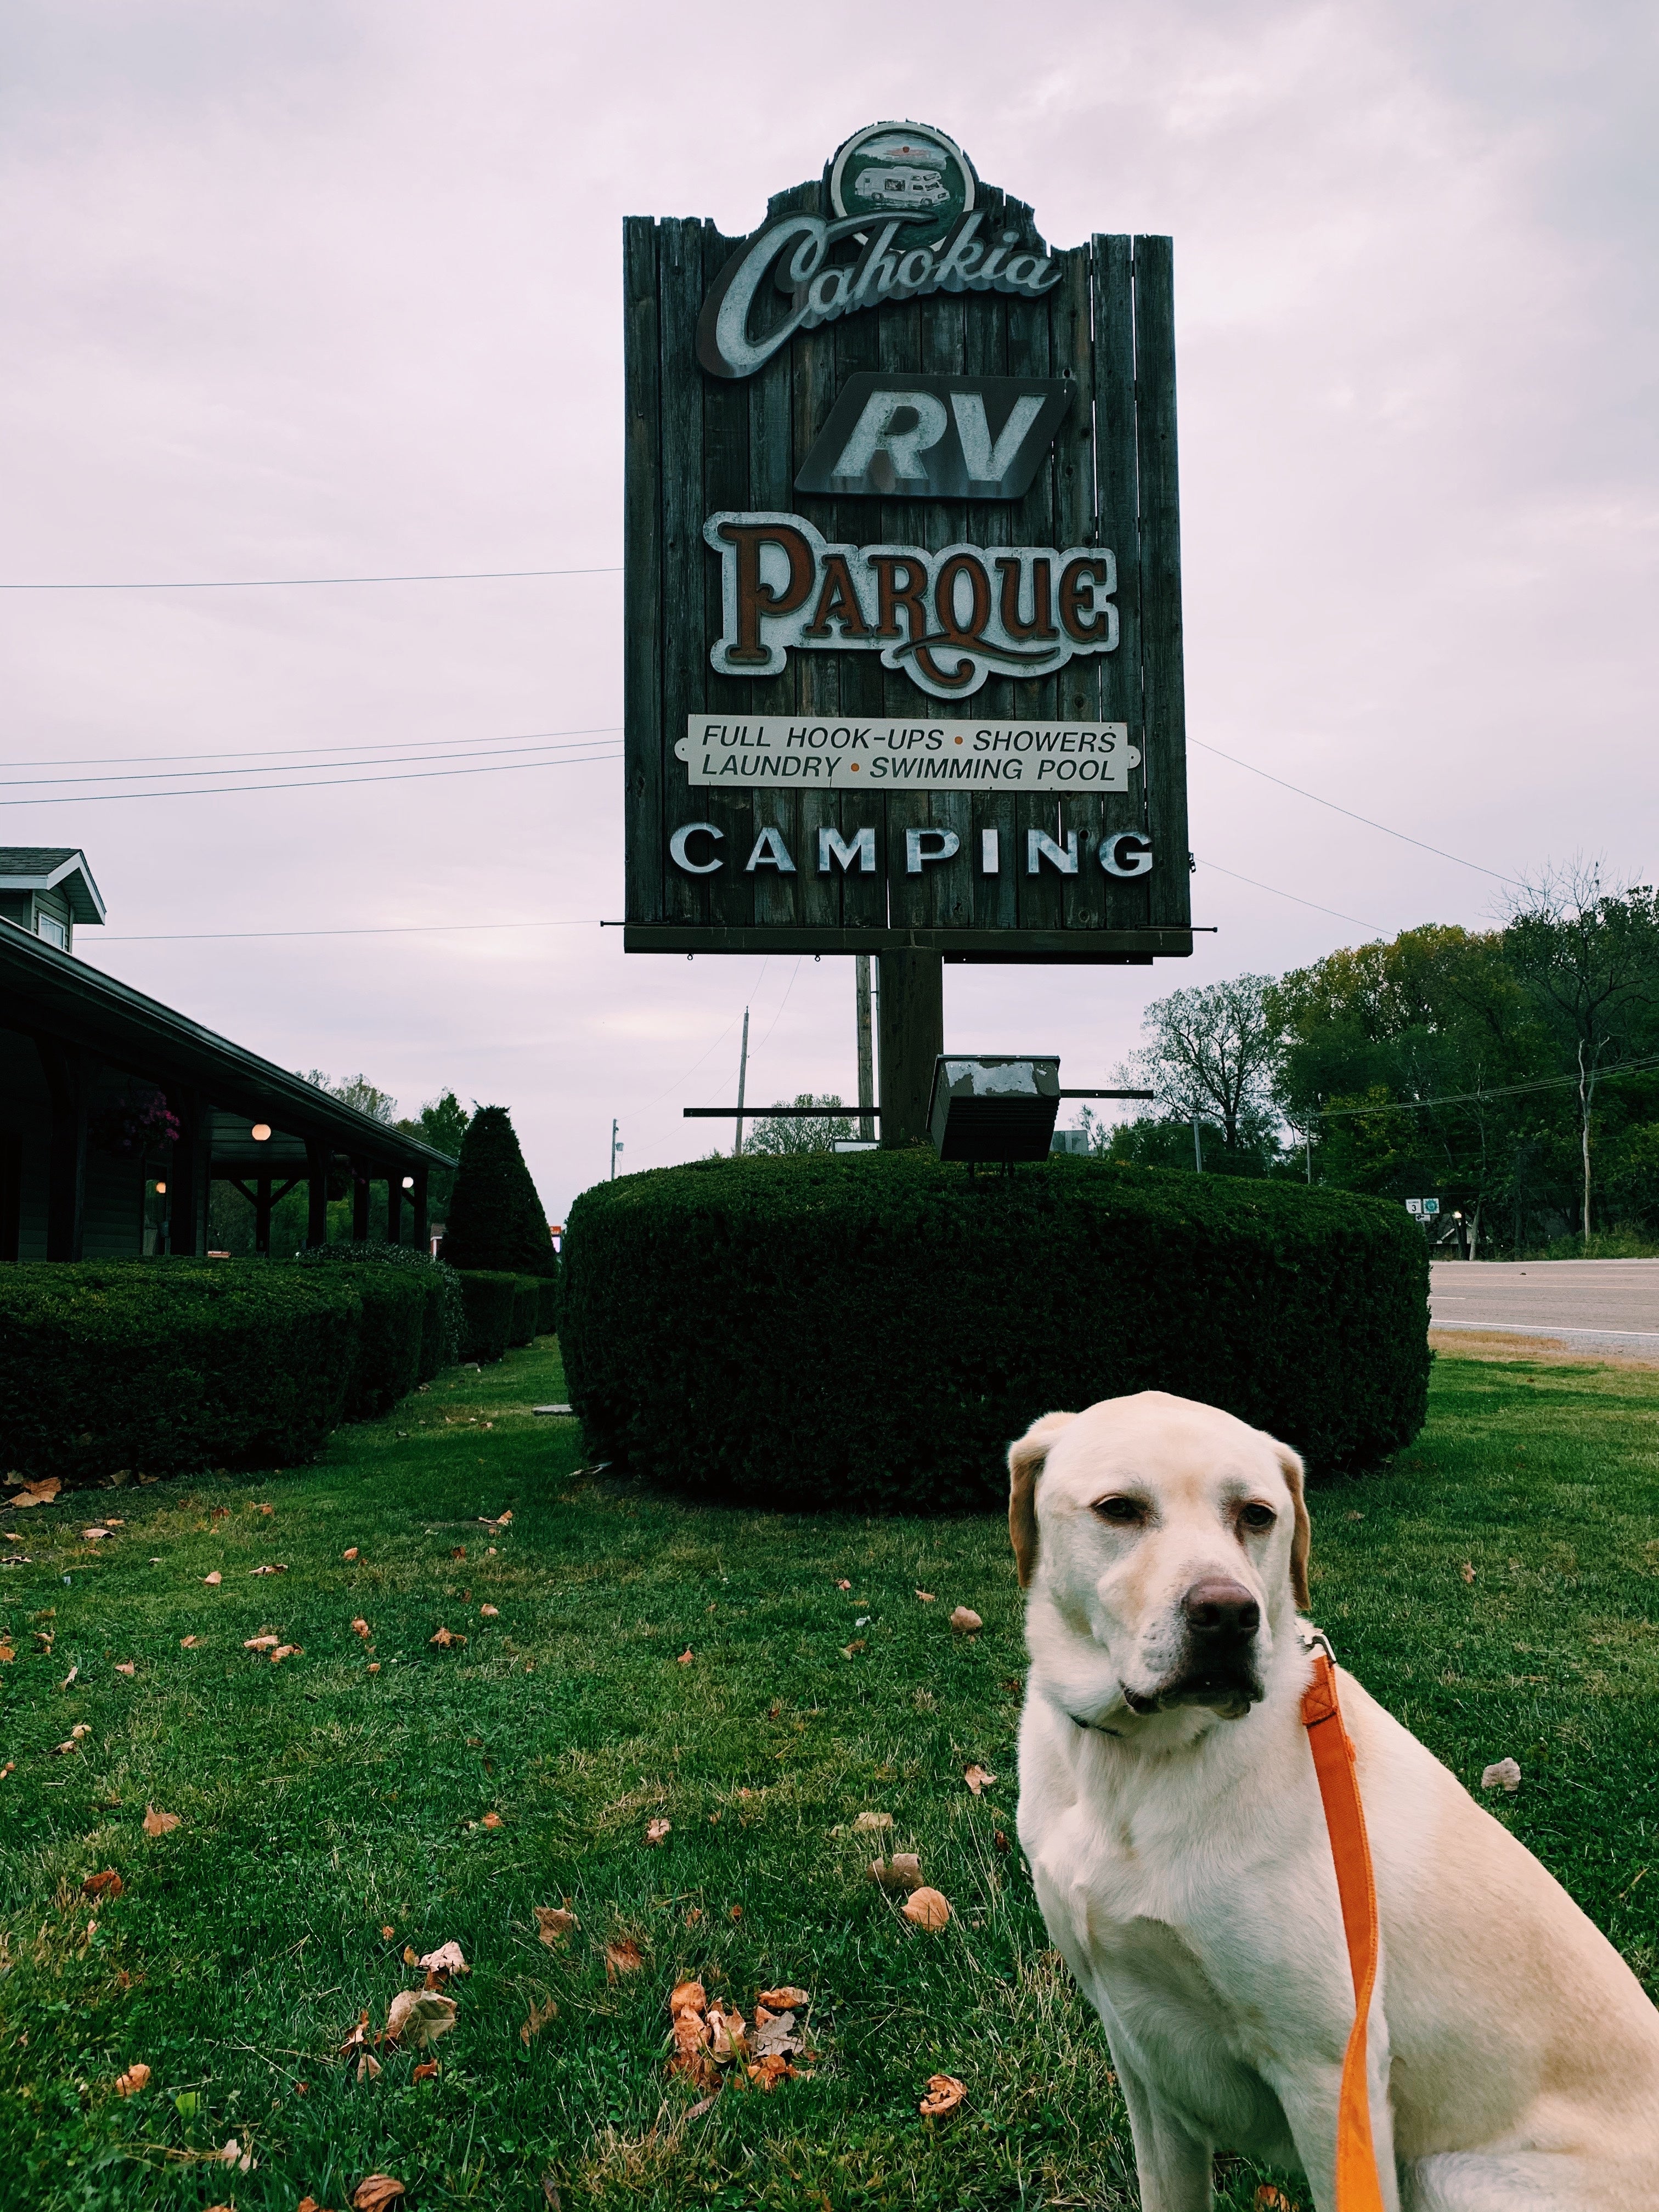 Camper submitted image from Cahokia RV Parque - 1